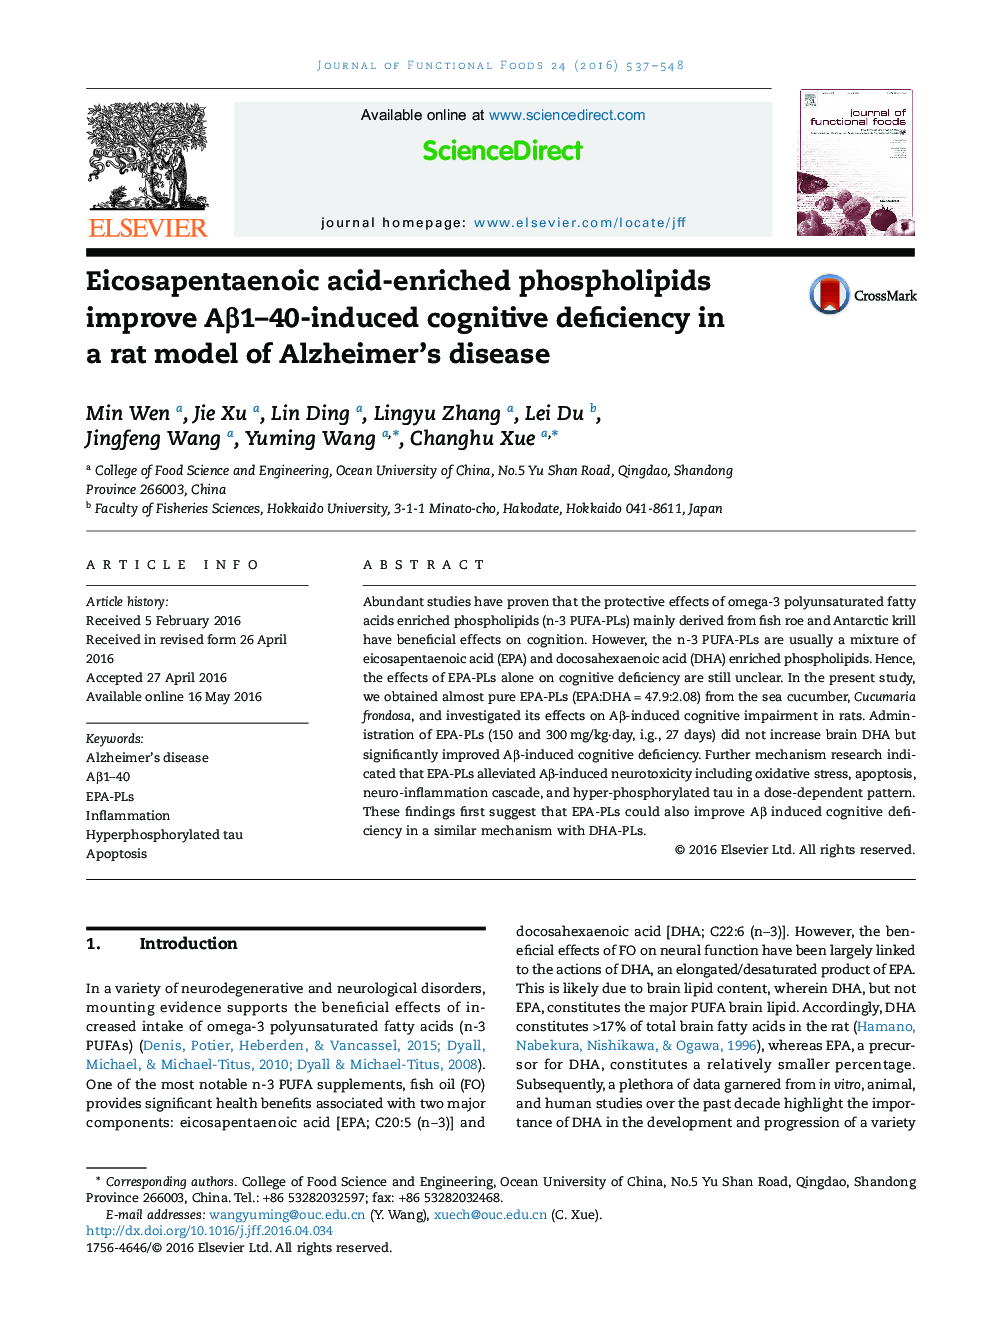 Eicosapentaenoic acid-enriched phospholipids improve Aβ1–40-induced cognitive deficiency in a rat model of Alzheimer's disease